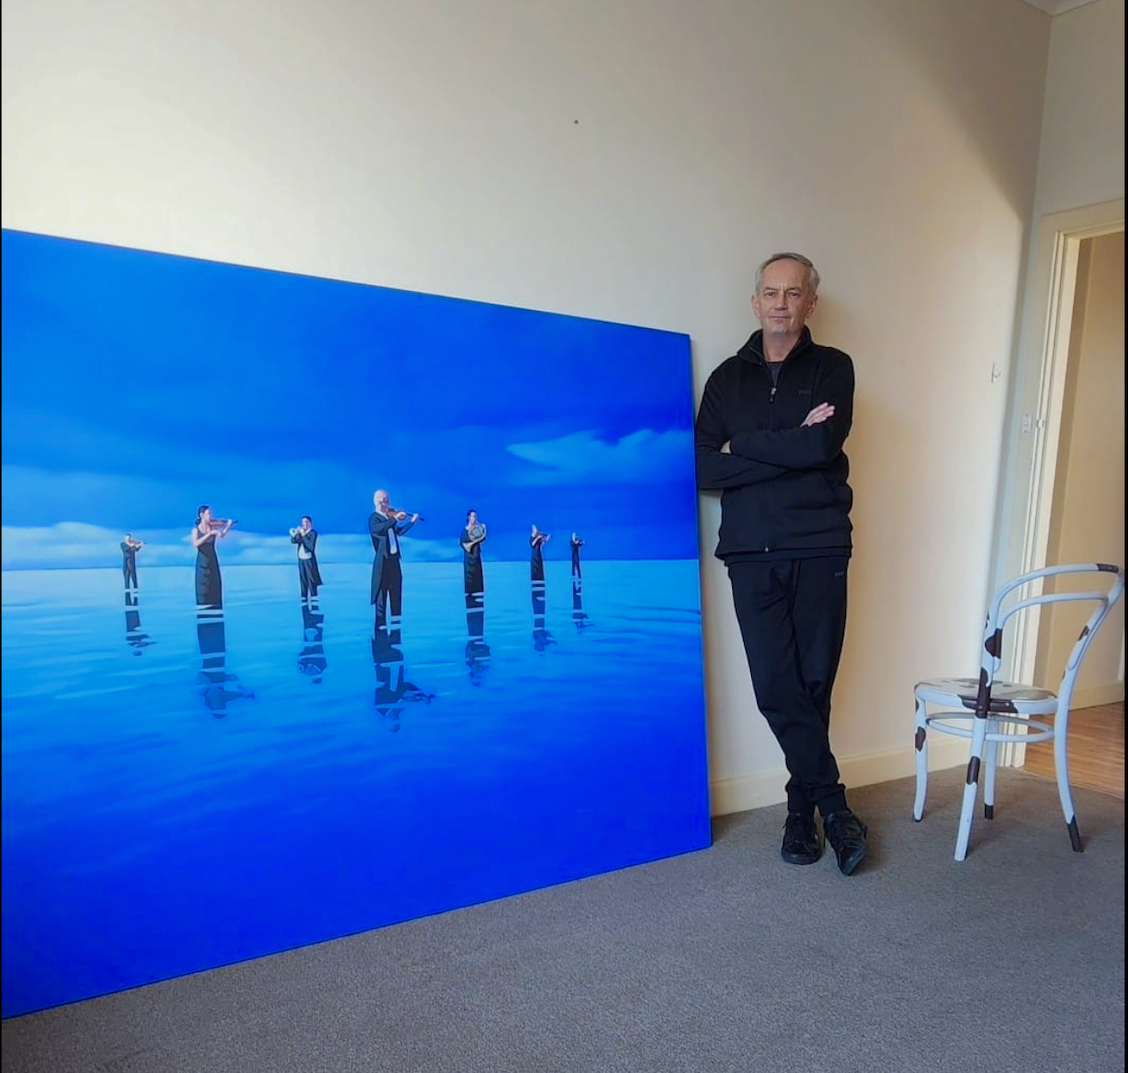 Big commission...
#commission #painting #interiors #art  #corporate #symphony #artist #reception #officeart #artcollector #blue #beachart #canvas #violins #artsales #orchestra #artcollectors #galleryart #Lawyers